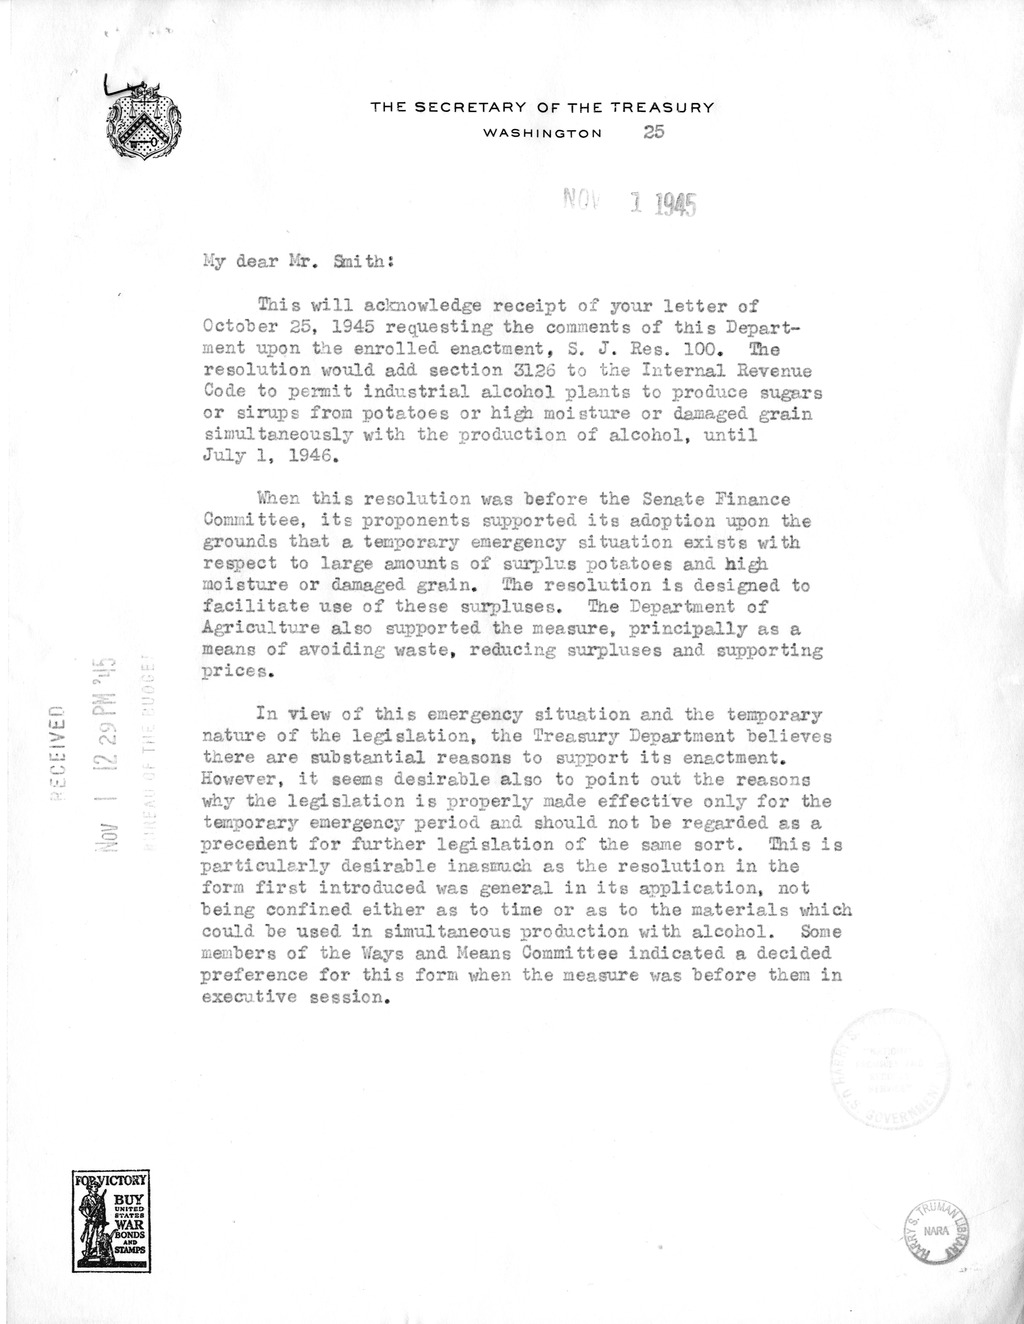 Memorandum from Paul H. Appleby to M. C. Latta, S.J. Res. 100, Permitting Alcohol Plants to Produce Sugars or Sirups Simultaneously With the Production of Alcohol Until July 1, 1946, with Attachments